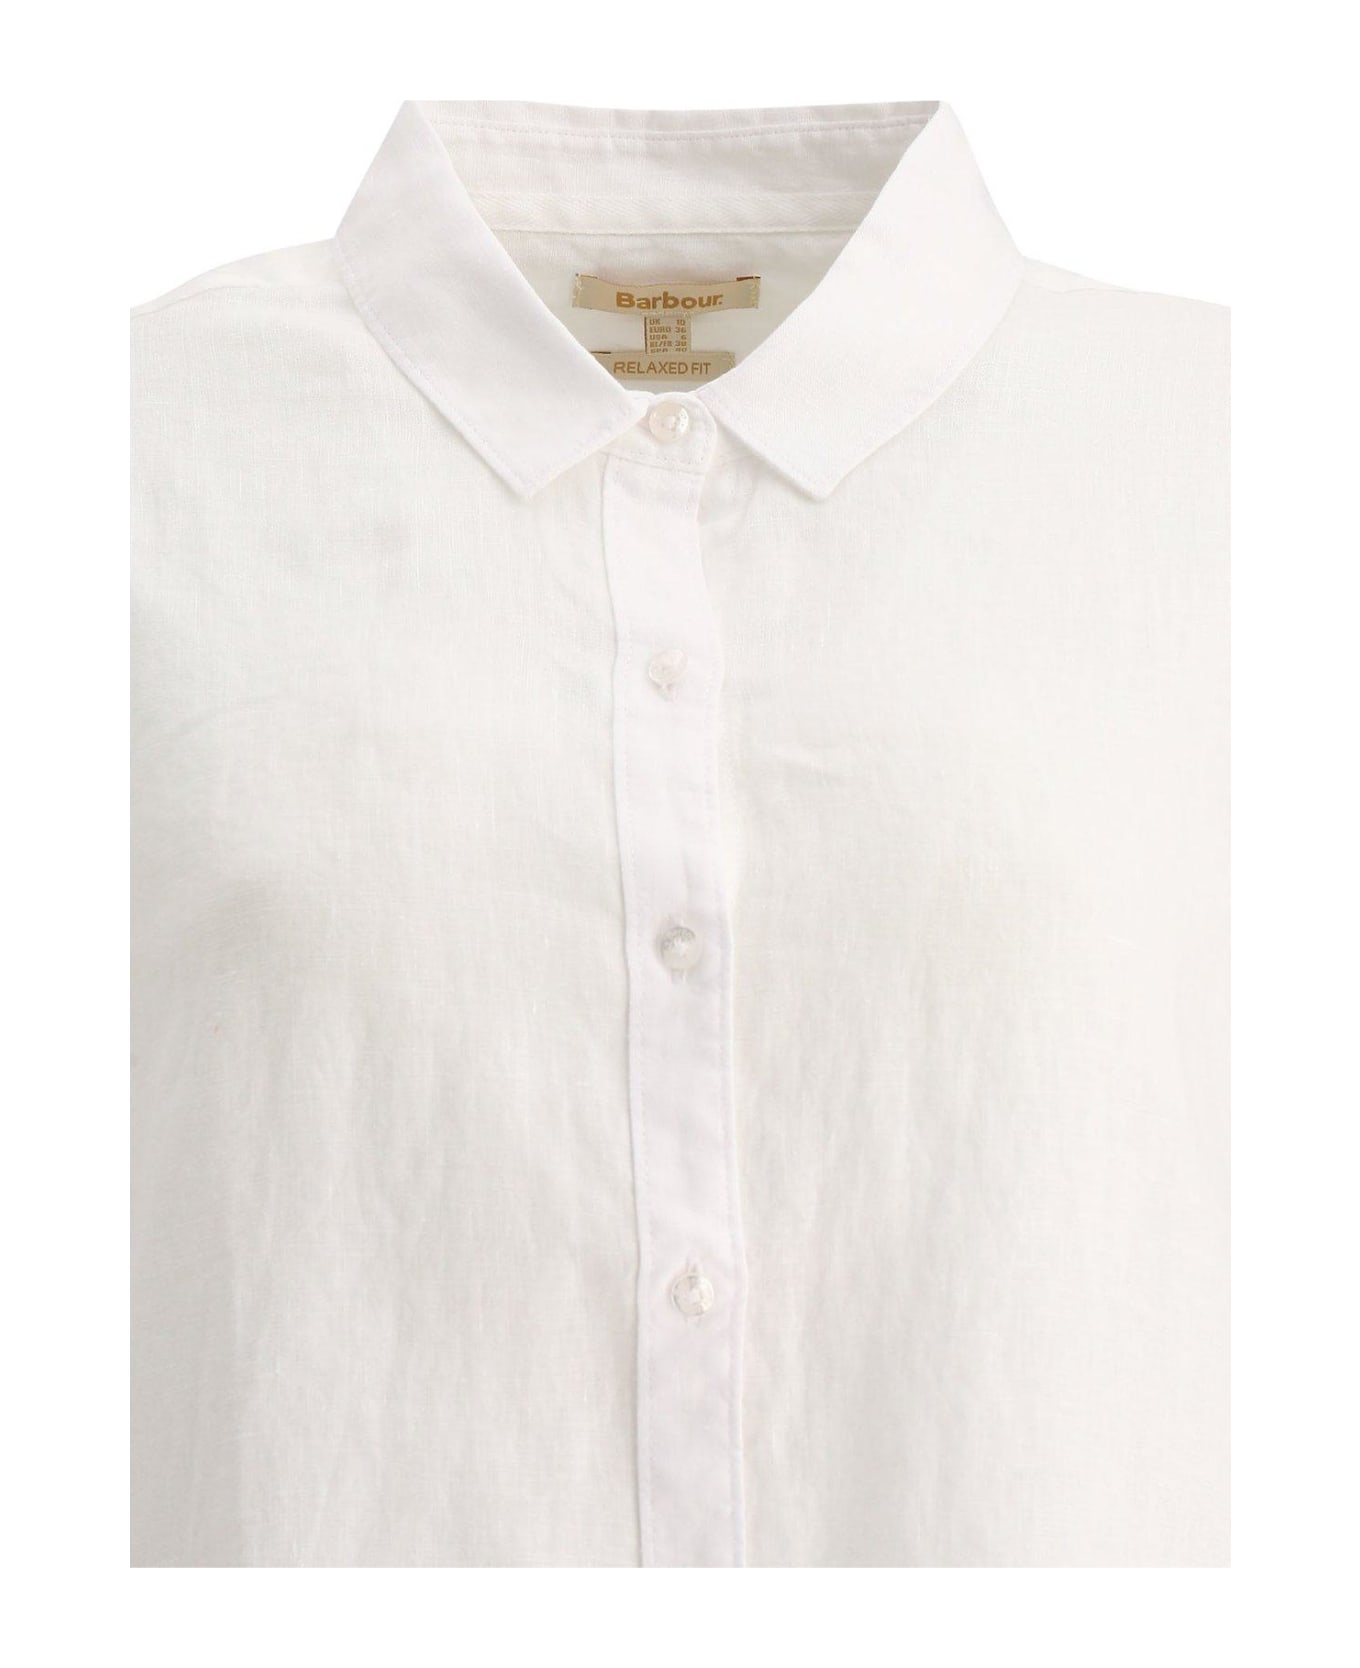 Barbour Marine Buttoned Long Sleeved Shirt - White